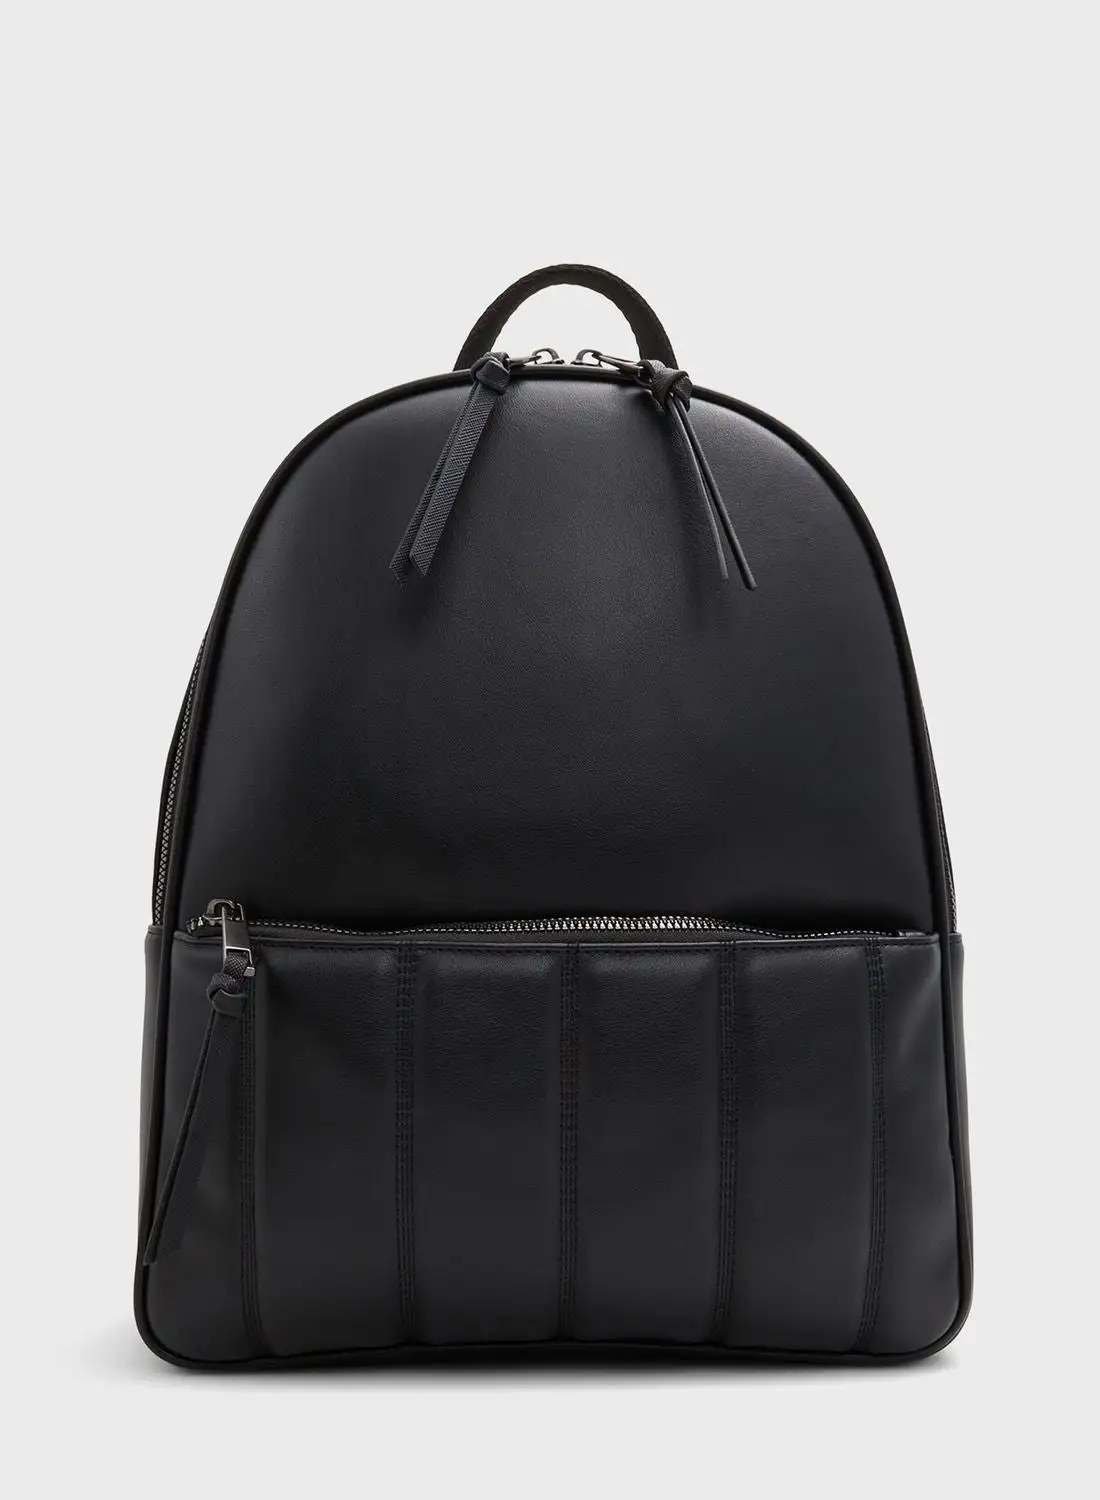 CALL IT SPRING Maina Top Handle Backpack